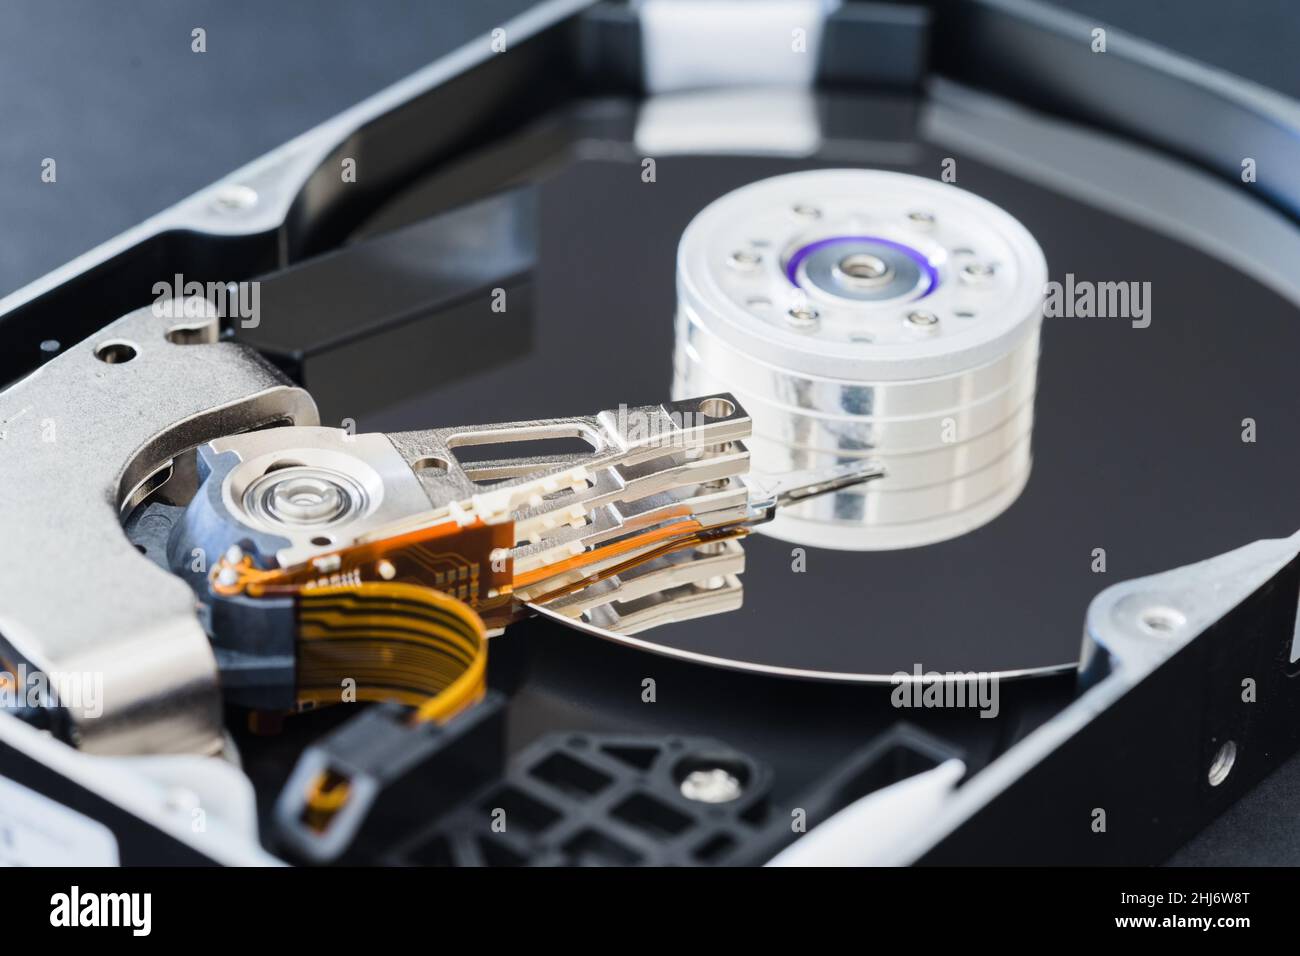 Hard disk drive inside close-up, spindle, actuator arm, read write head, platter Stock Photo